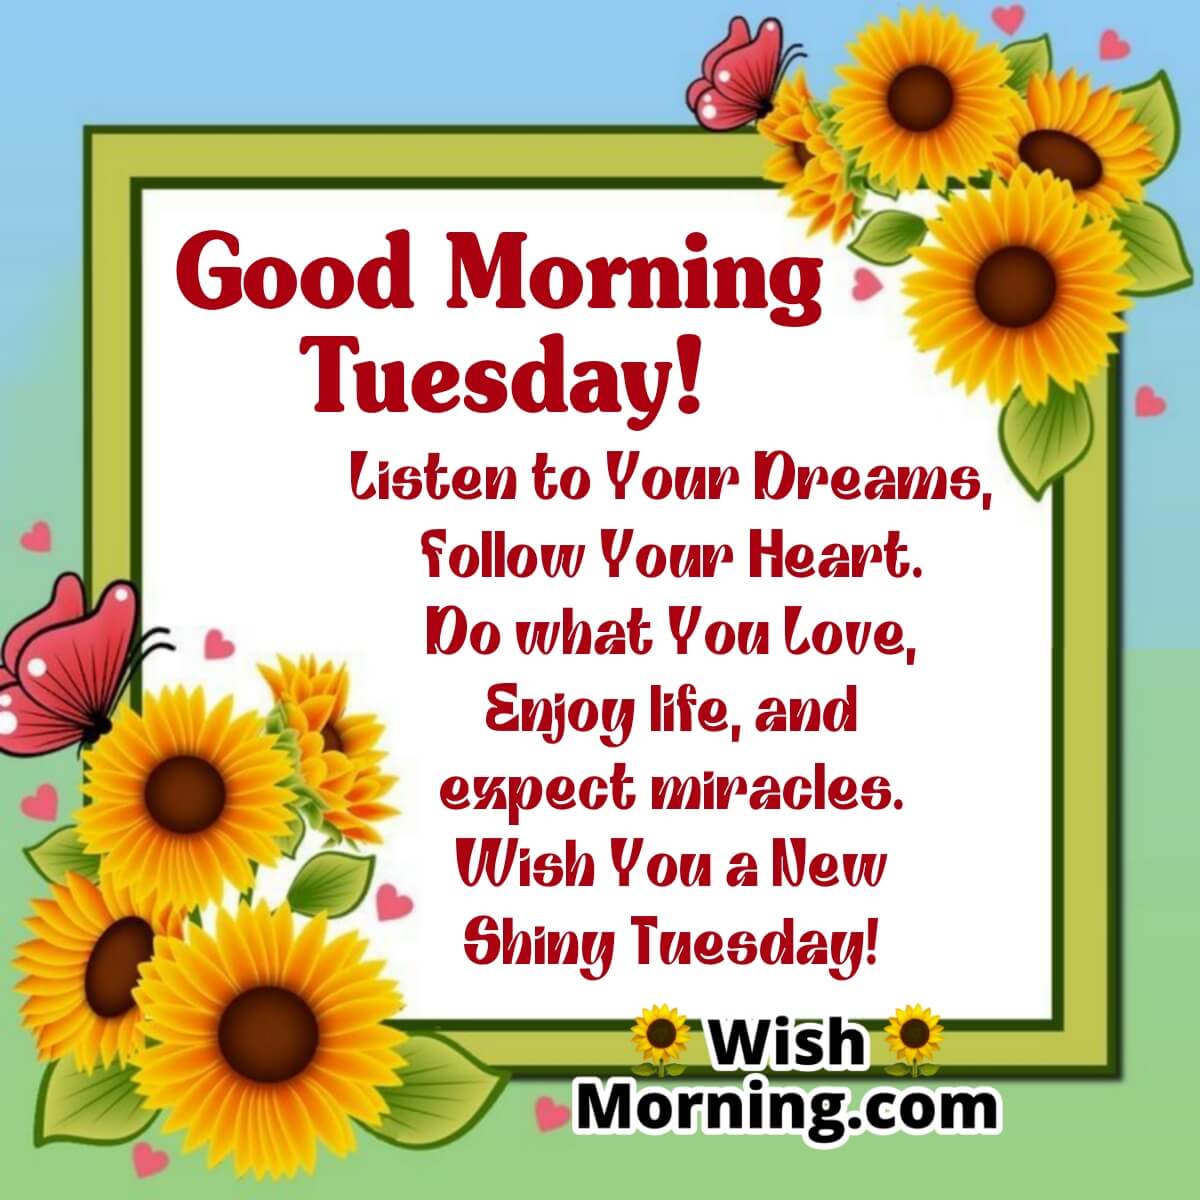 Tuesday Morning Wishes - Wish Morning